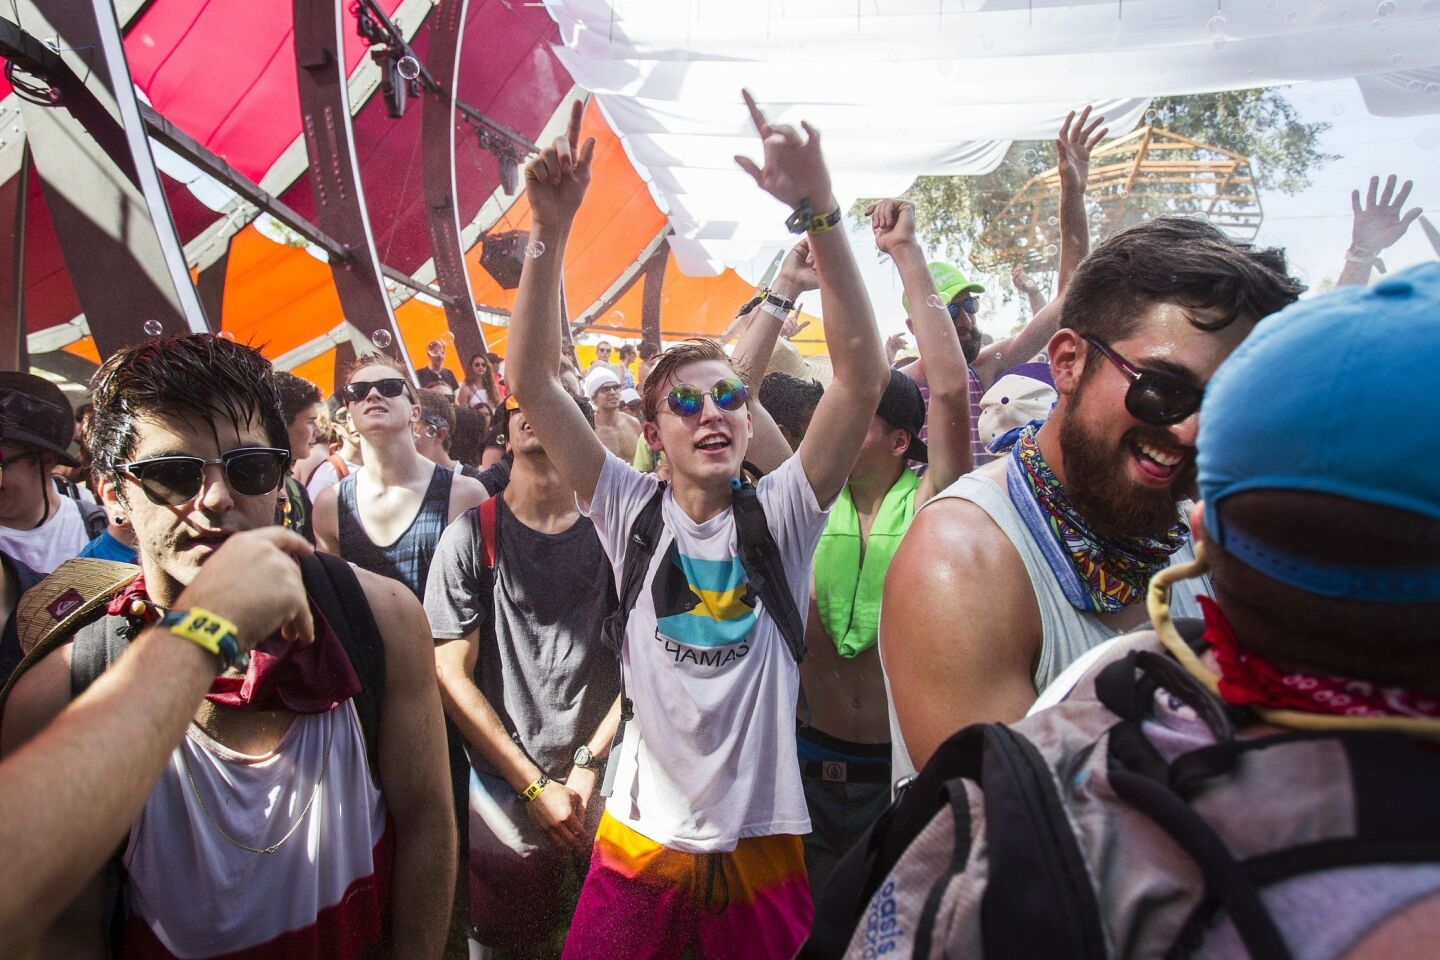 The 2015 Coachella Valley Music and Arts Festival gets underway. The Do Lab gets an early start as Coachella gets underway. Festival goers dance to pounding bass while being doused with water.